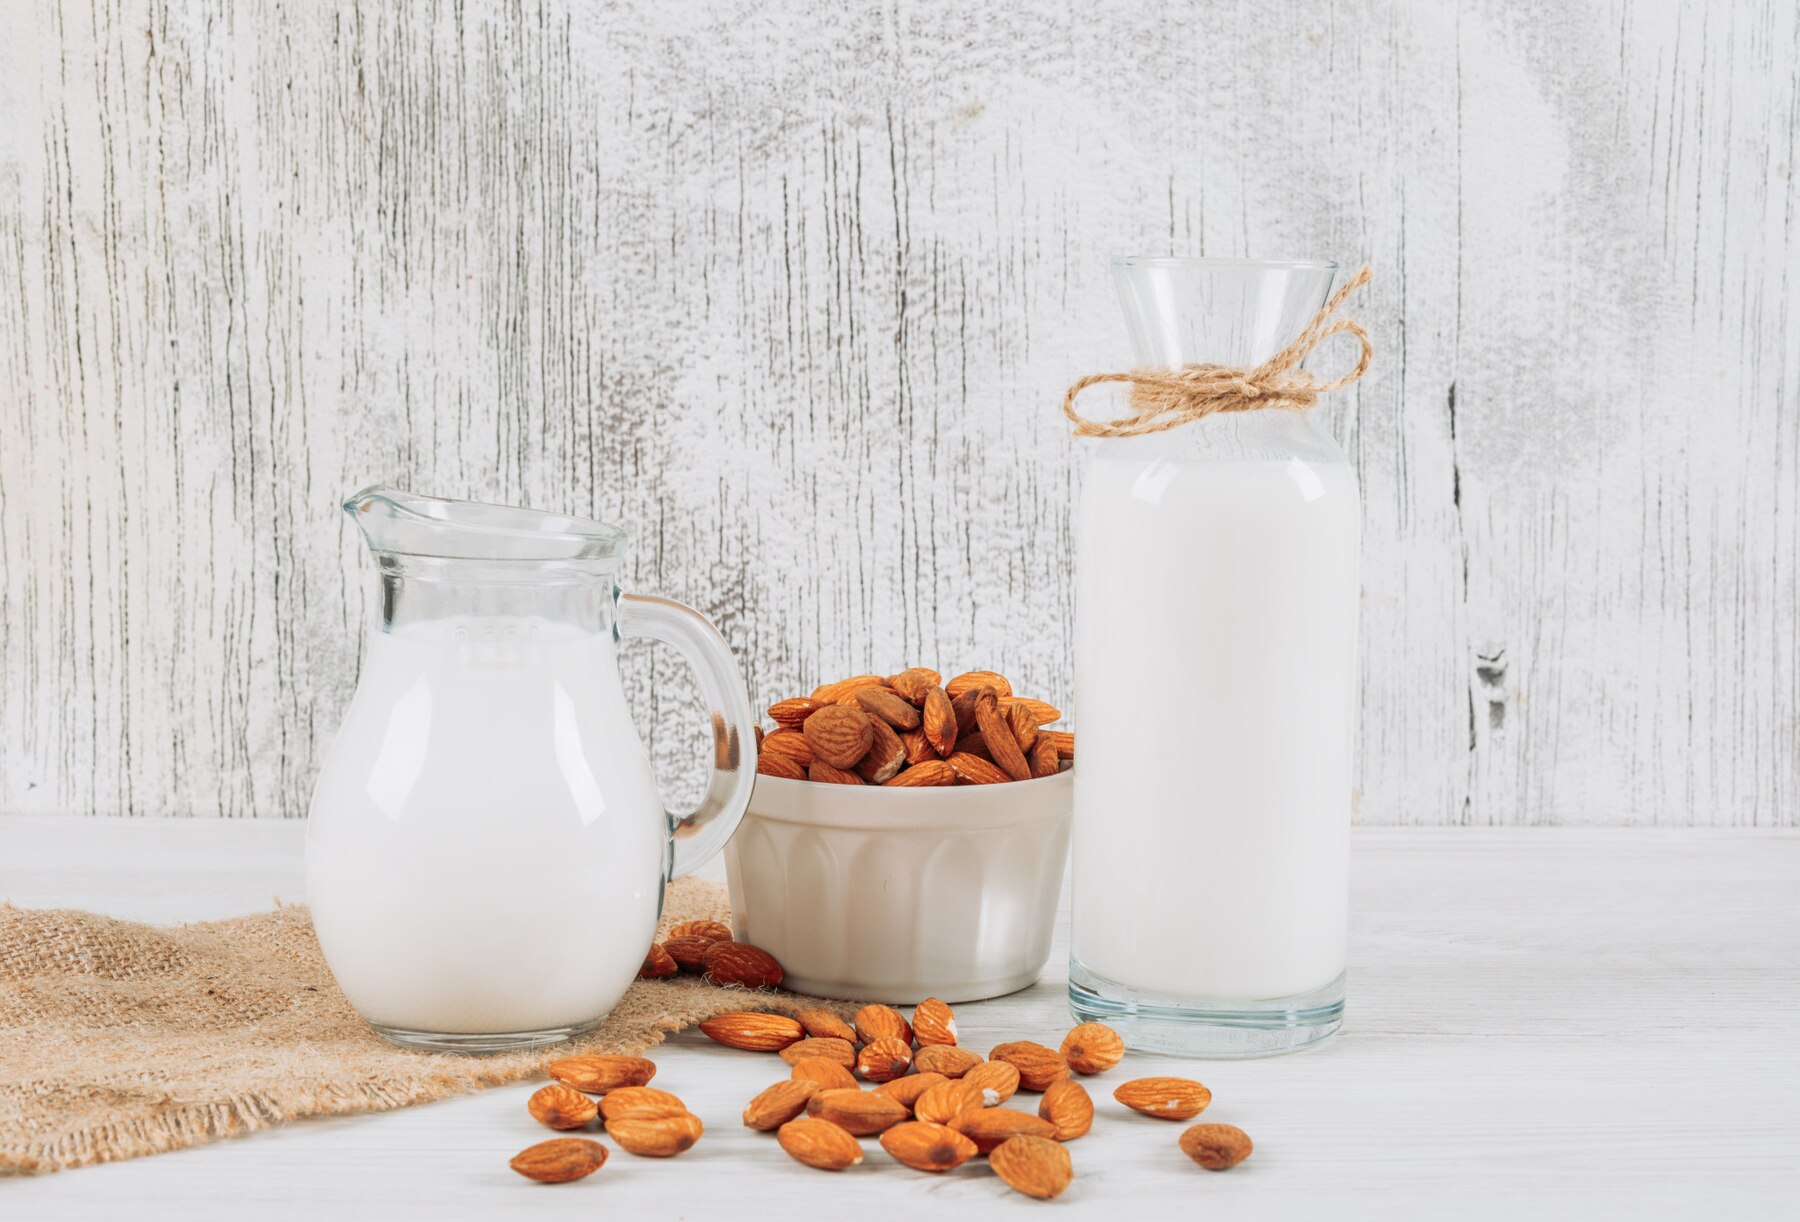 side-view-milk-carafe-with-bowl-of-almonds-and-bottle-of-milk-on-white-wooden-and-piece-of-sack-background-horizontal_176474-4682.jpg